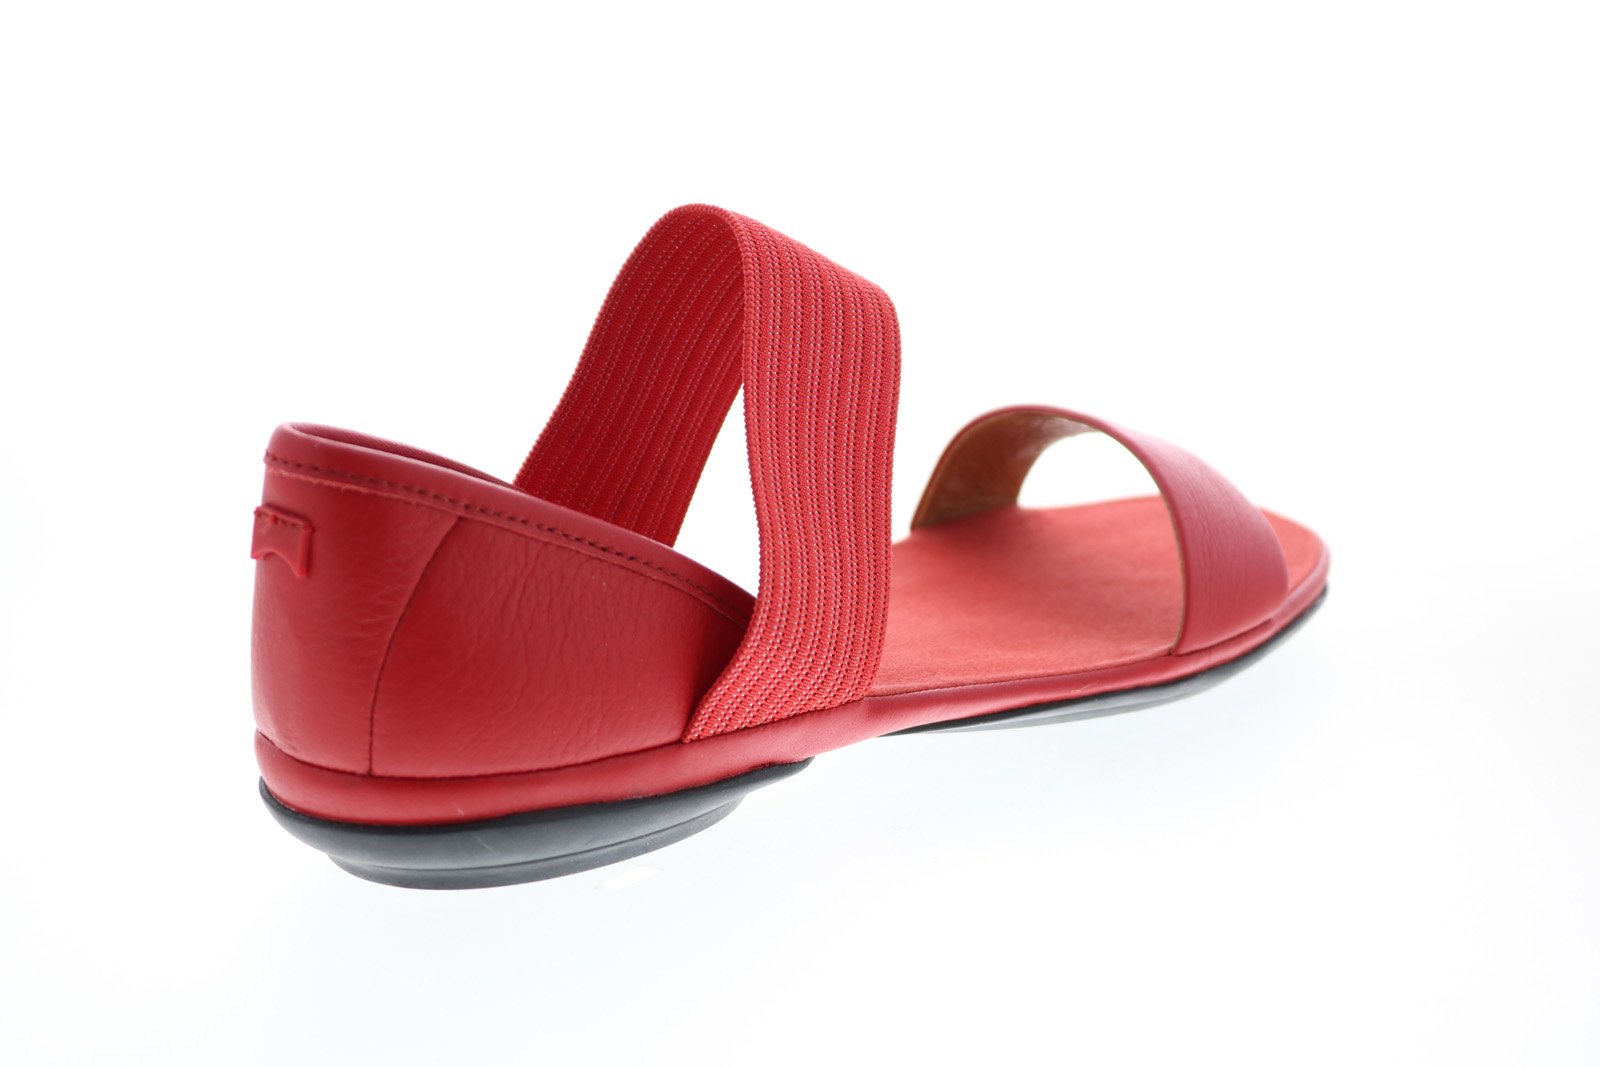 Aeropostale End Leather Slip On Sandals Shoes Size 7 Birks Red Two Strap